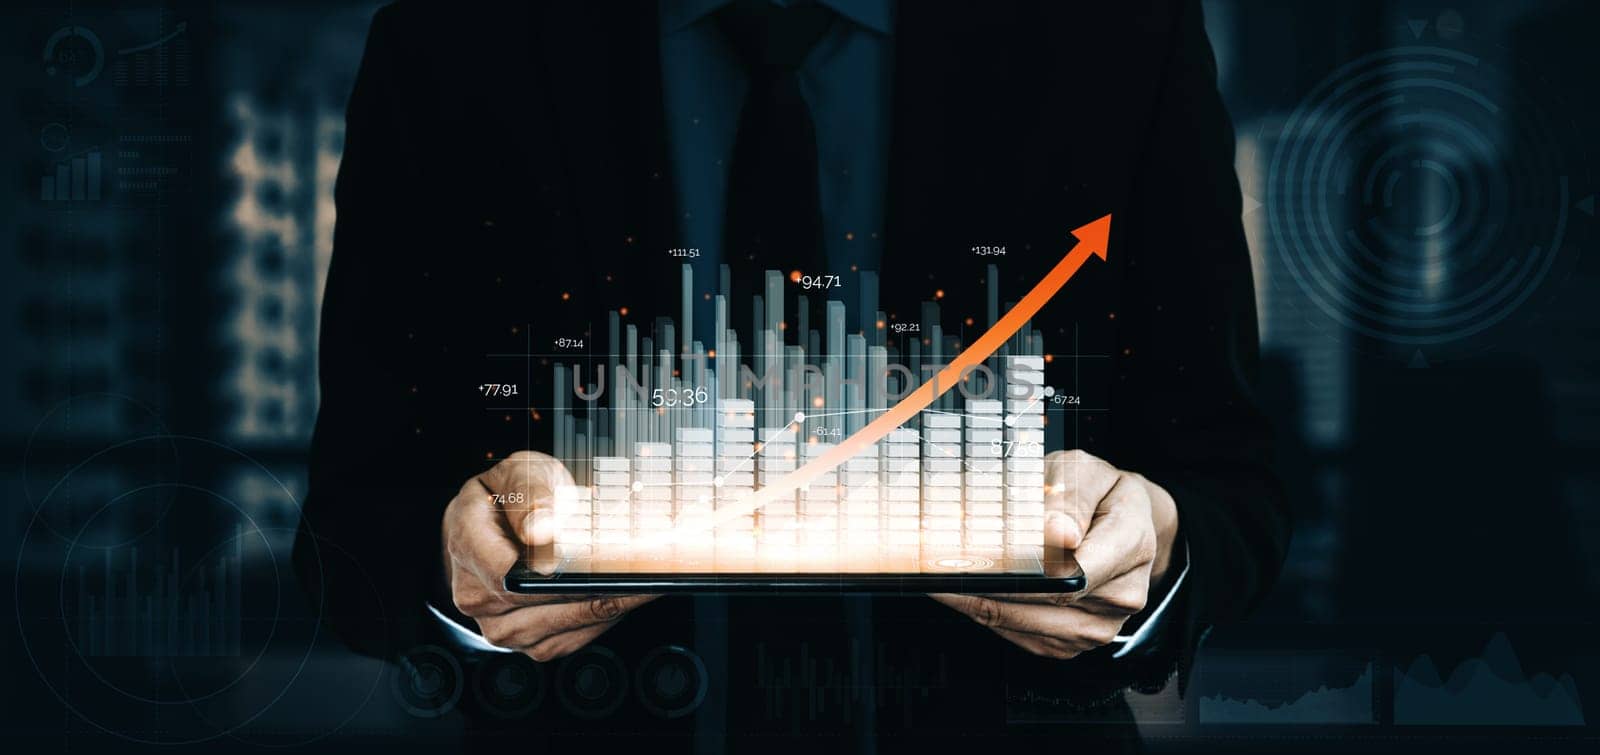 Double Exposure Image of Business Profit Growth uds by biancoblue